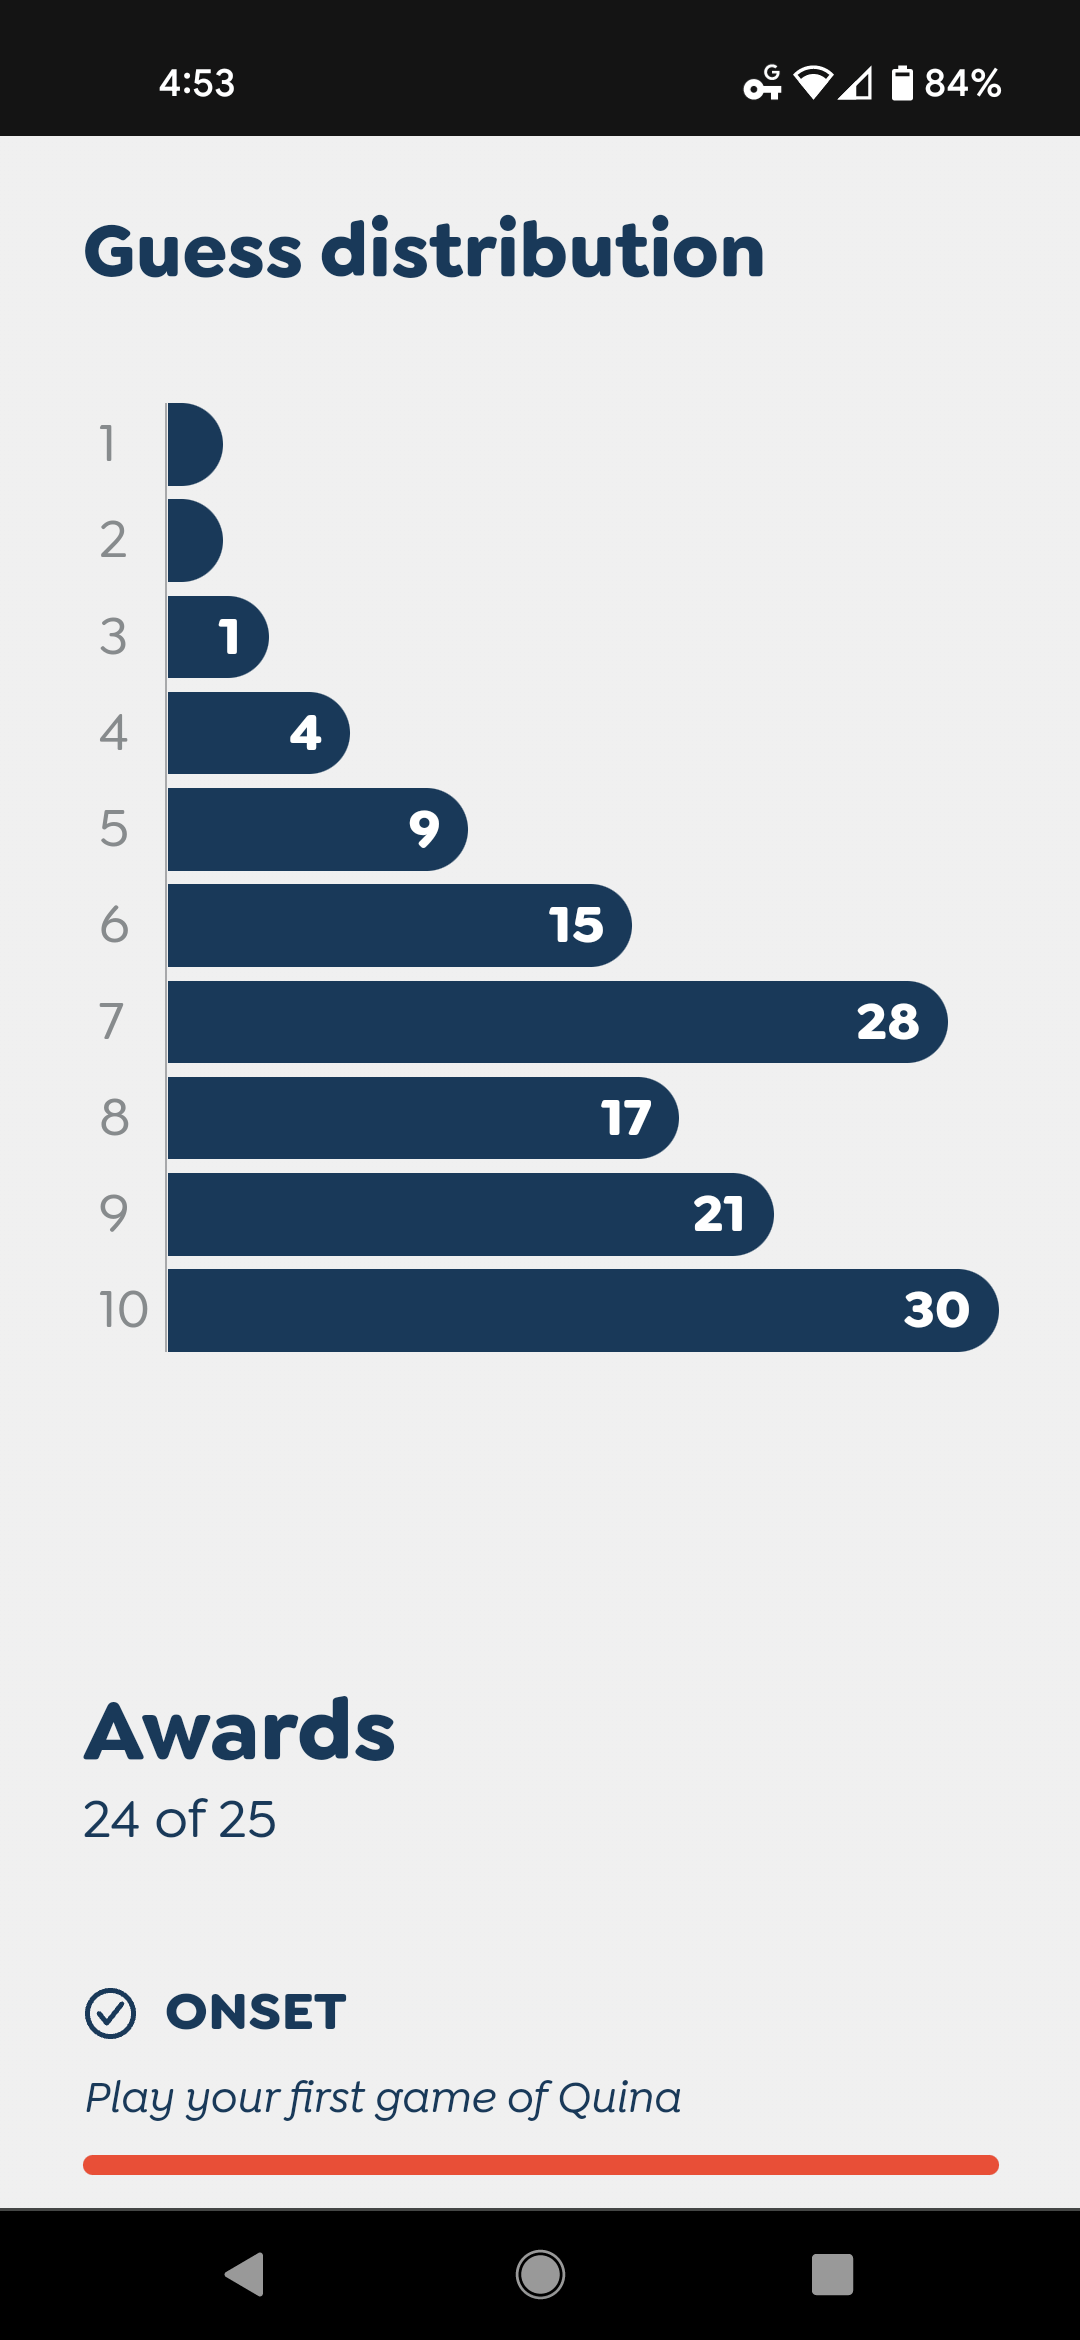 A bar chart of guesses per game in Quina, shown on a mobile device